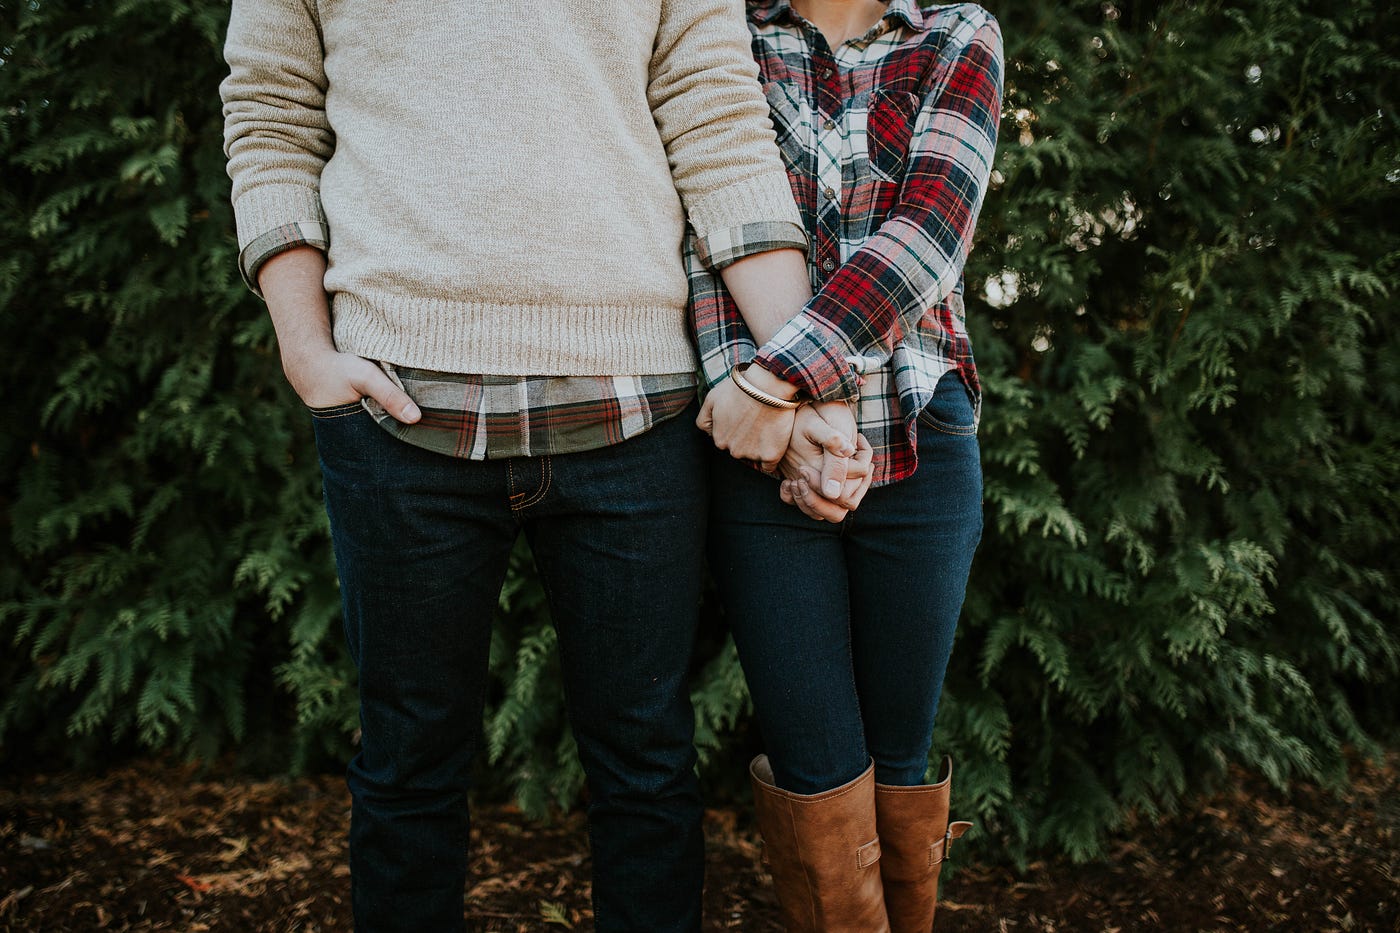 7 Signs of a Controlling Partner photo